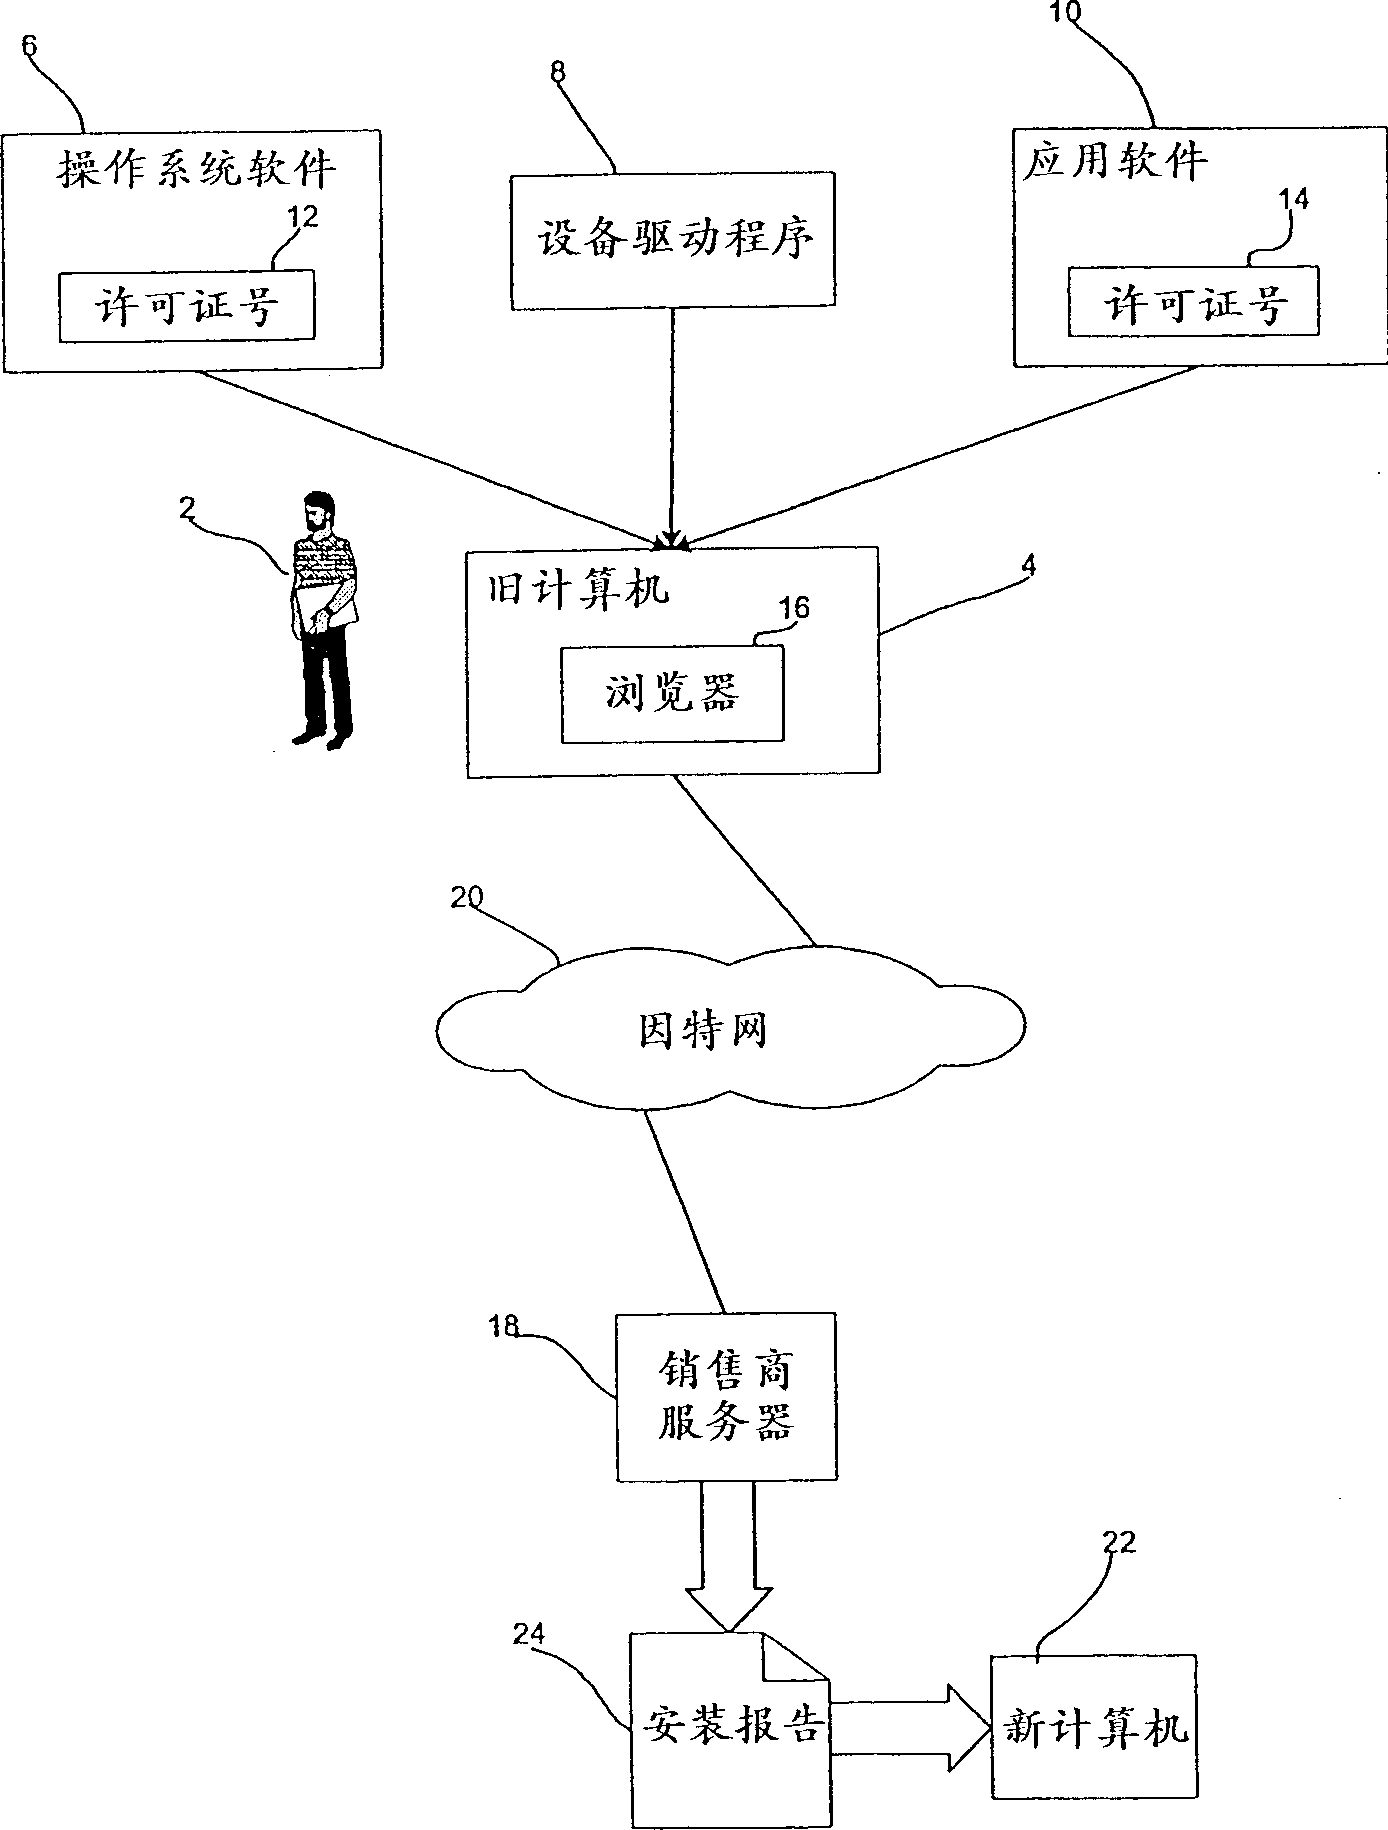 Method, system and program for reuse of software license for new computer hardware